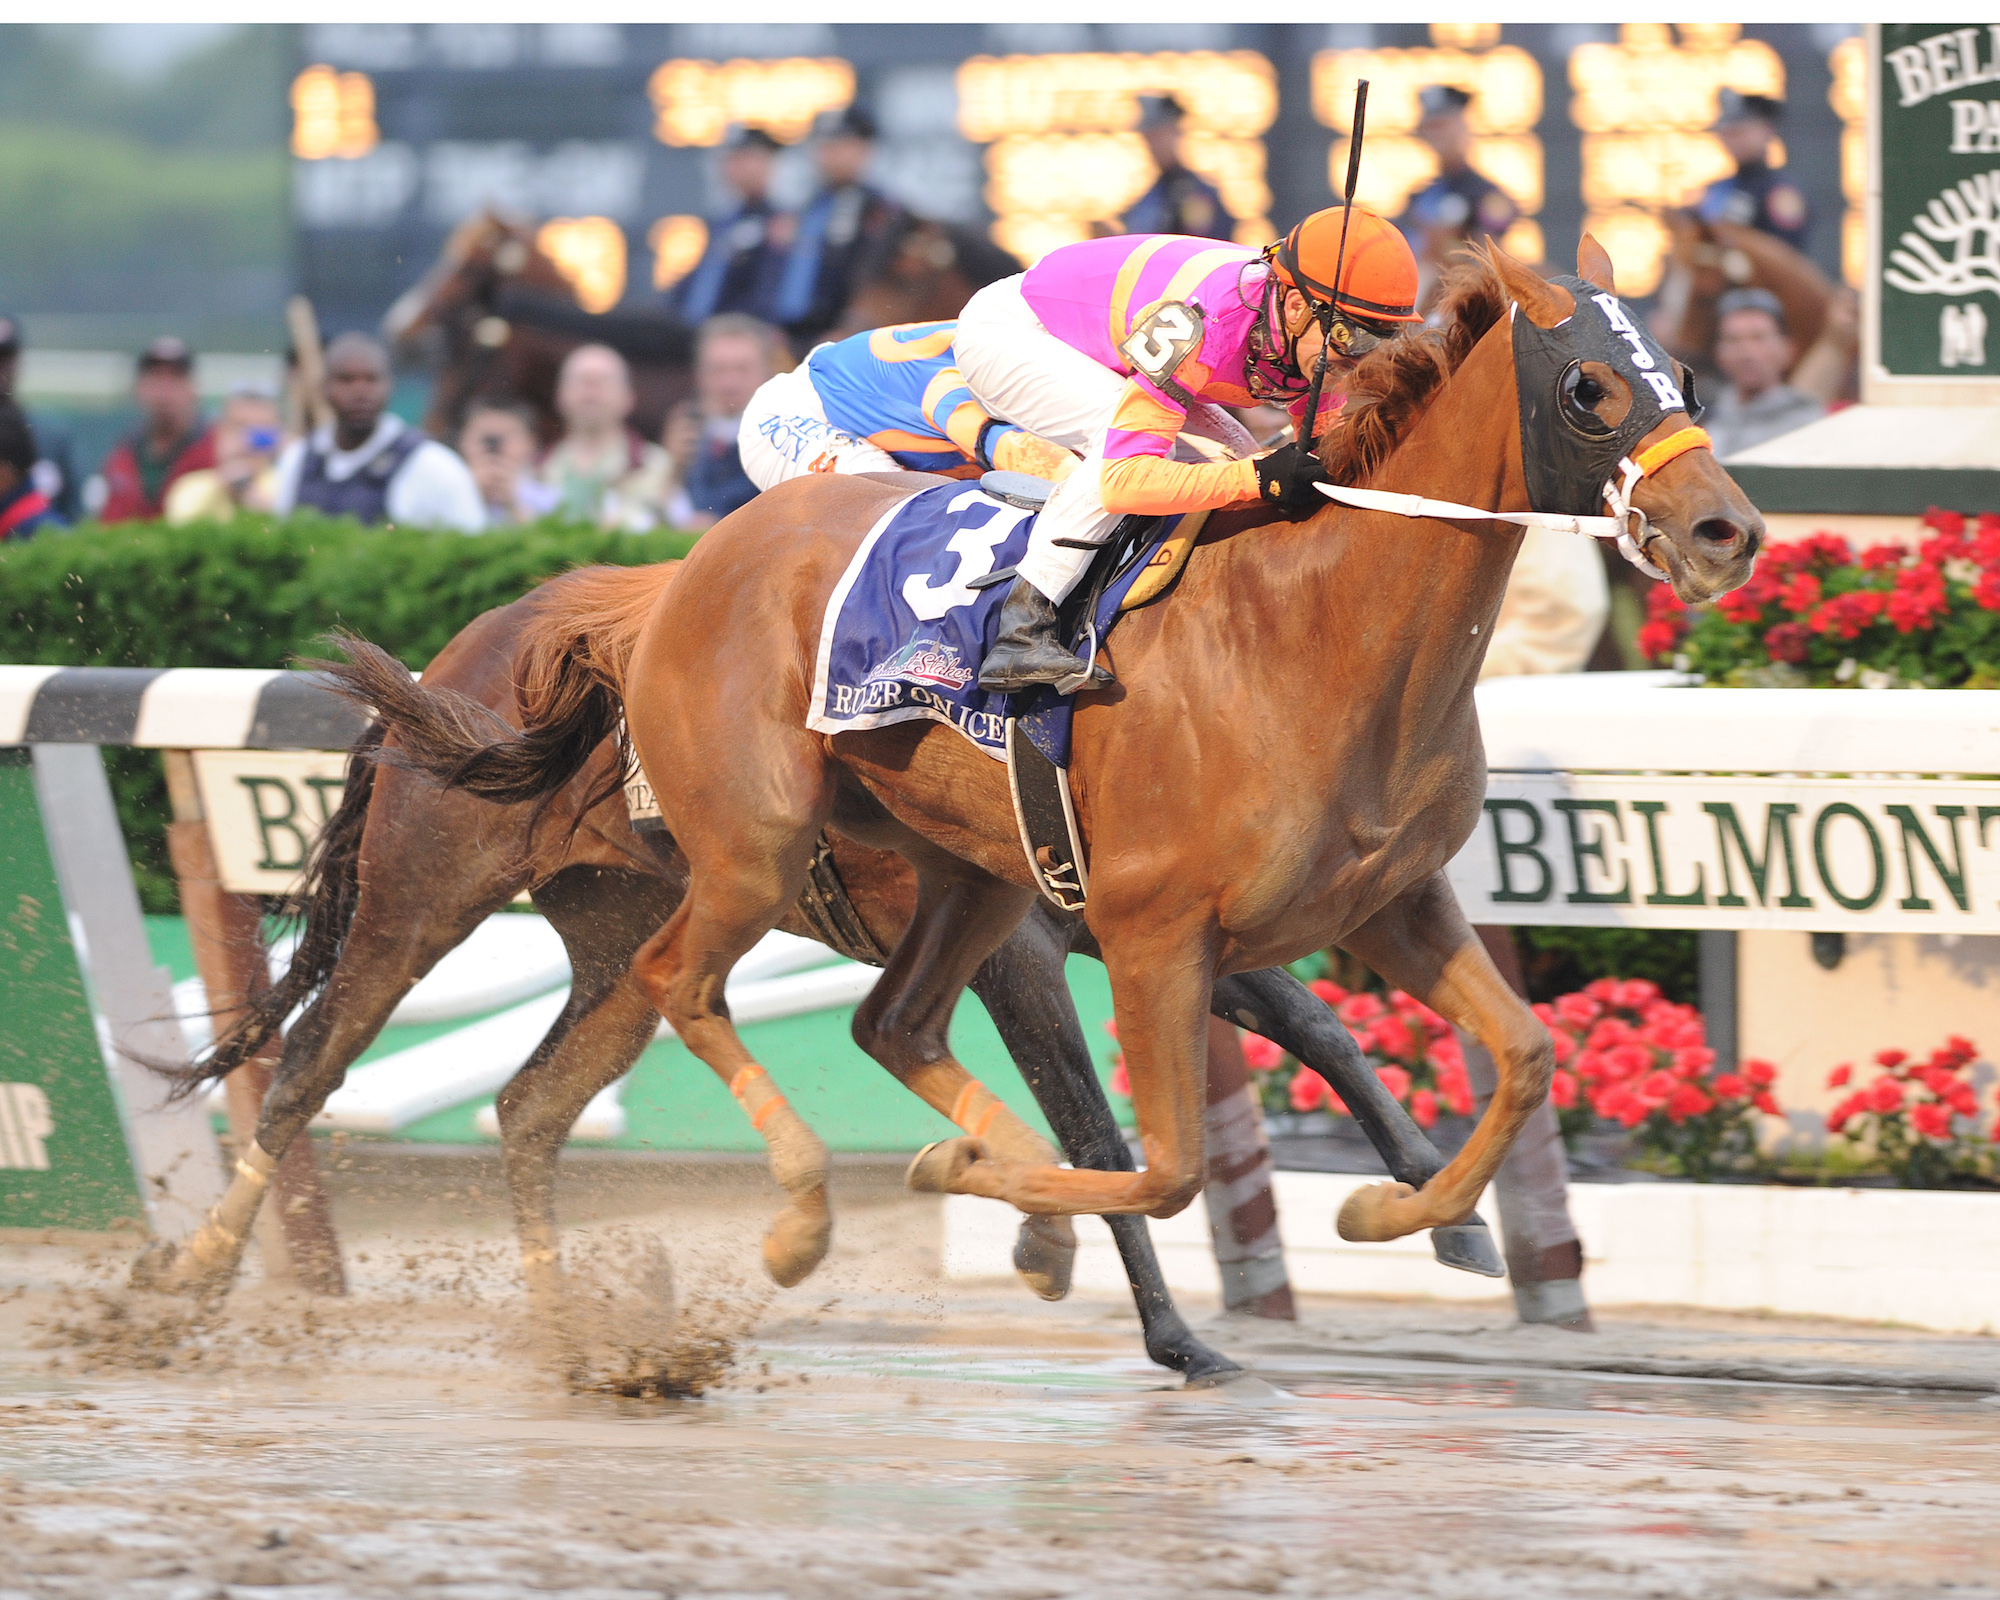 Ruler On Ice winning the Belmont Stakes in 2011. Photo: NYRA.com